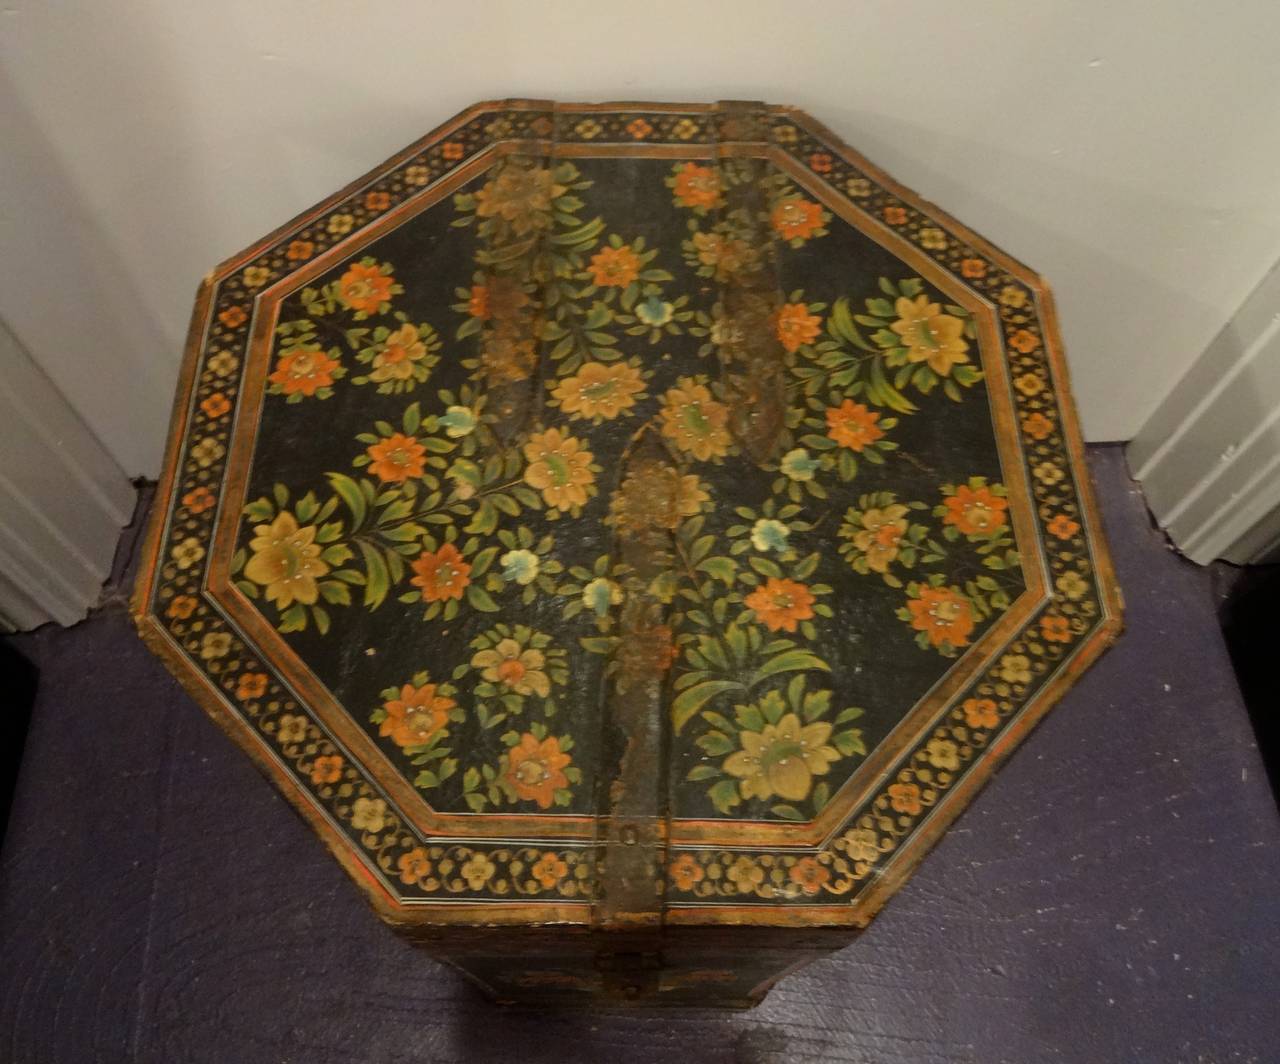 An English Chinese Export hexagonal hinged wedding box lacquered in black with floral motifs, brass handles.